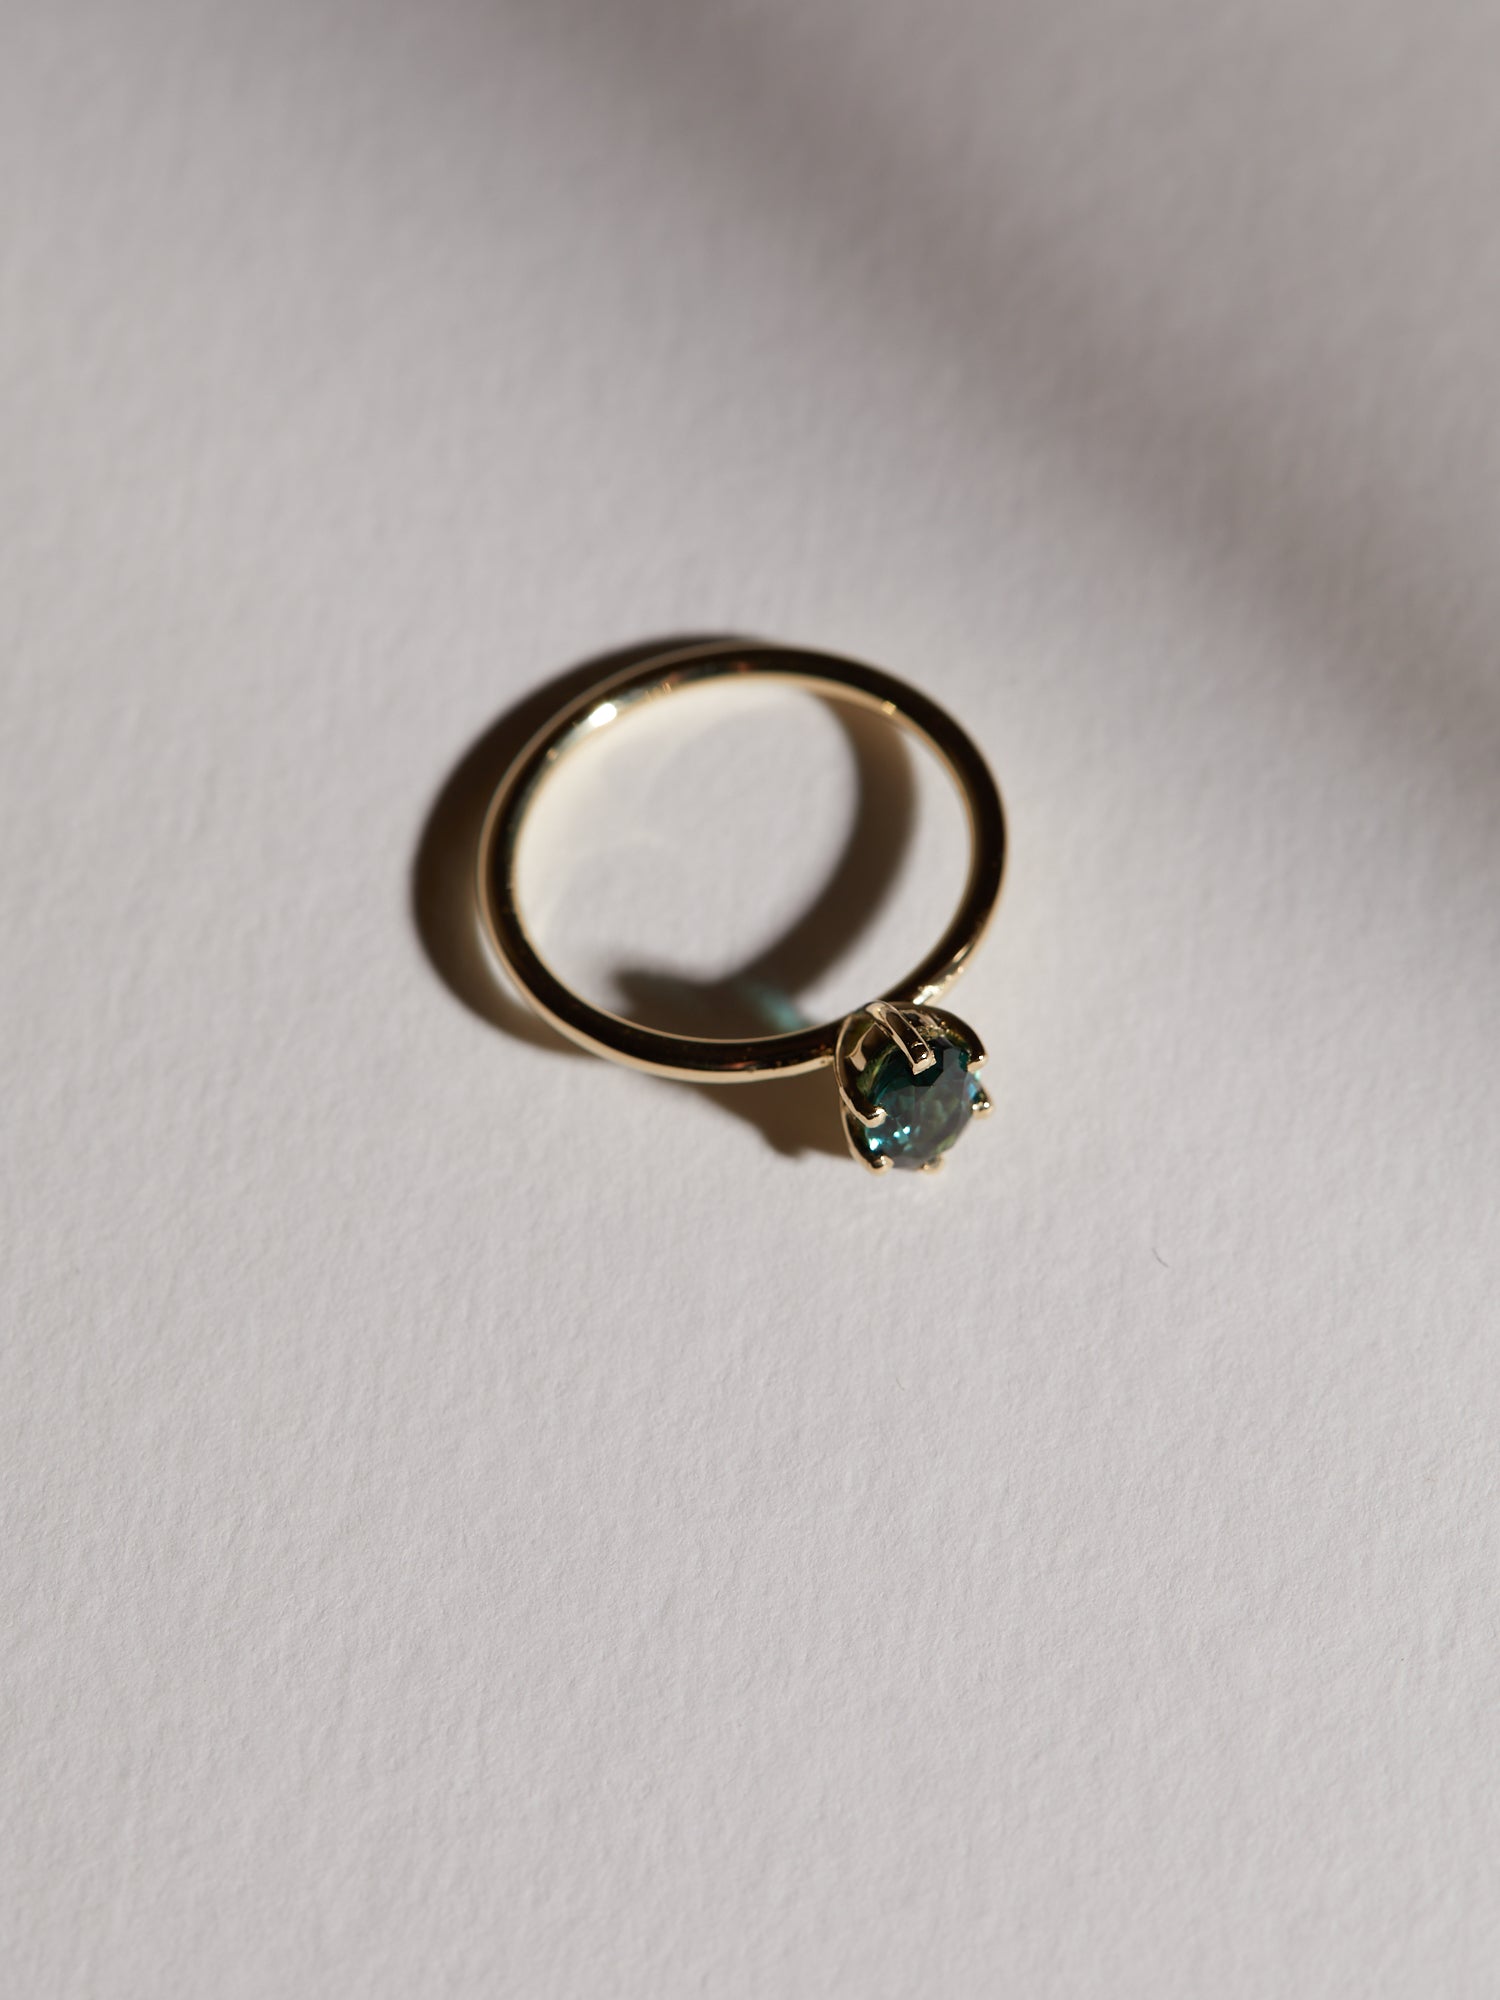 0.83ct Oval teal tourmaline solitaire.